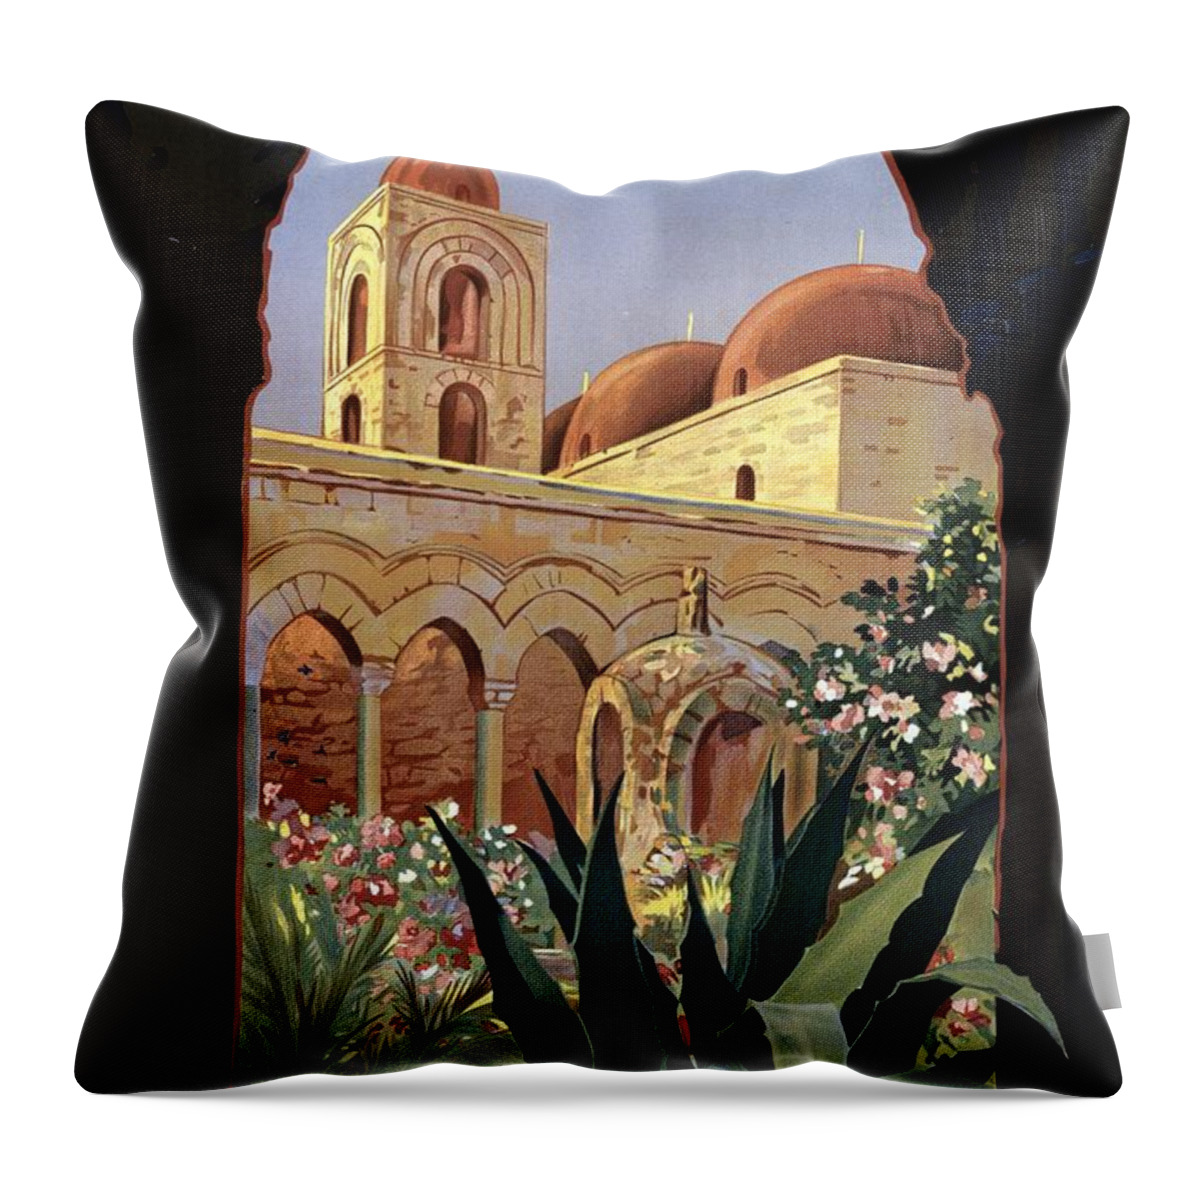 Palermo Throw Pillow featuring the mixed media Palermo, Sicily, Italy - Garden Courtyard with Arcade and Tower - Retro travel Poster by Studio Grafiikka